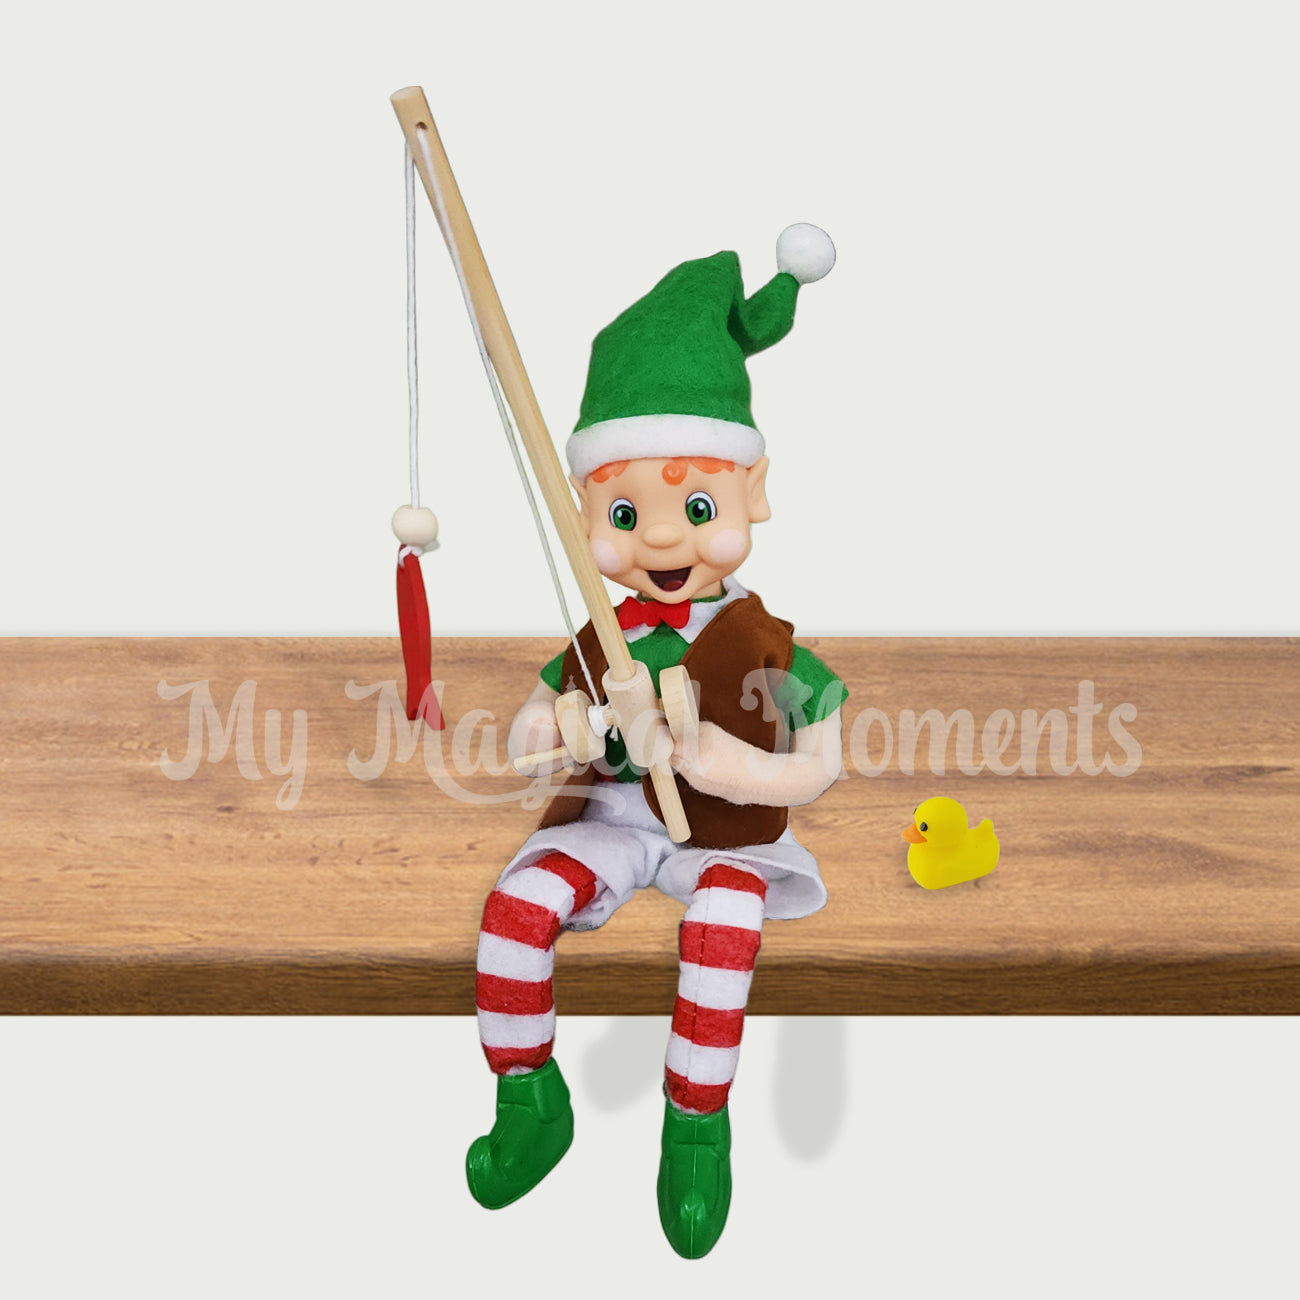 Fishing Scene on shelf with My elf friends and duck prop